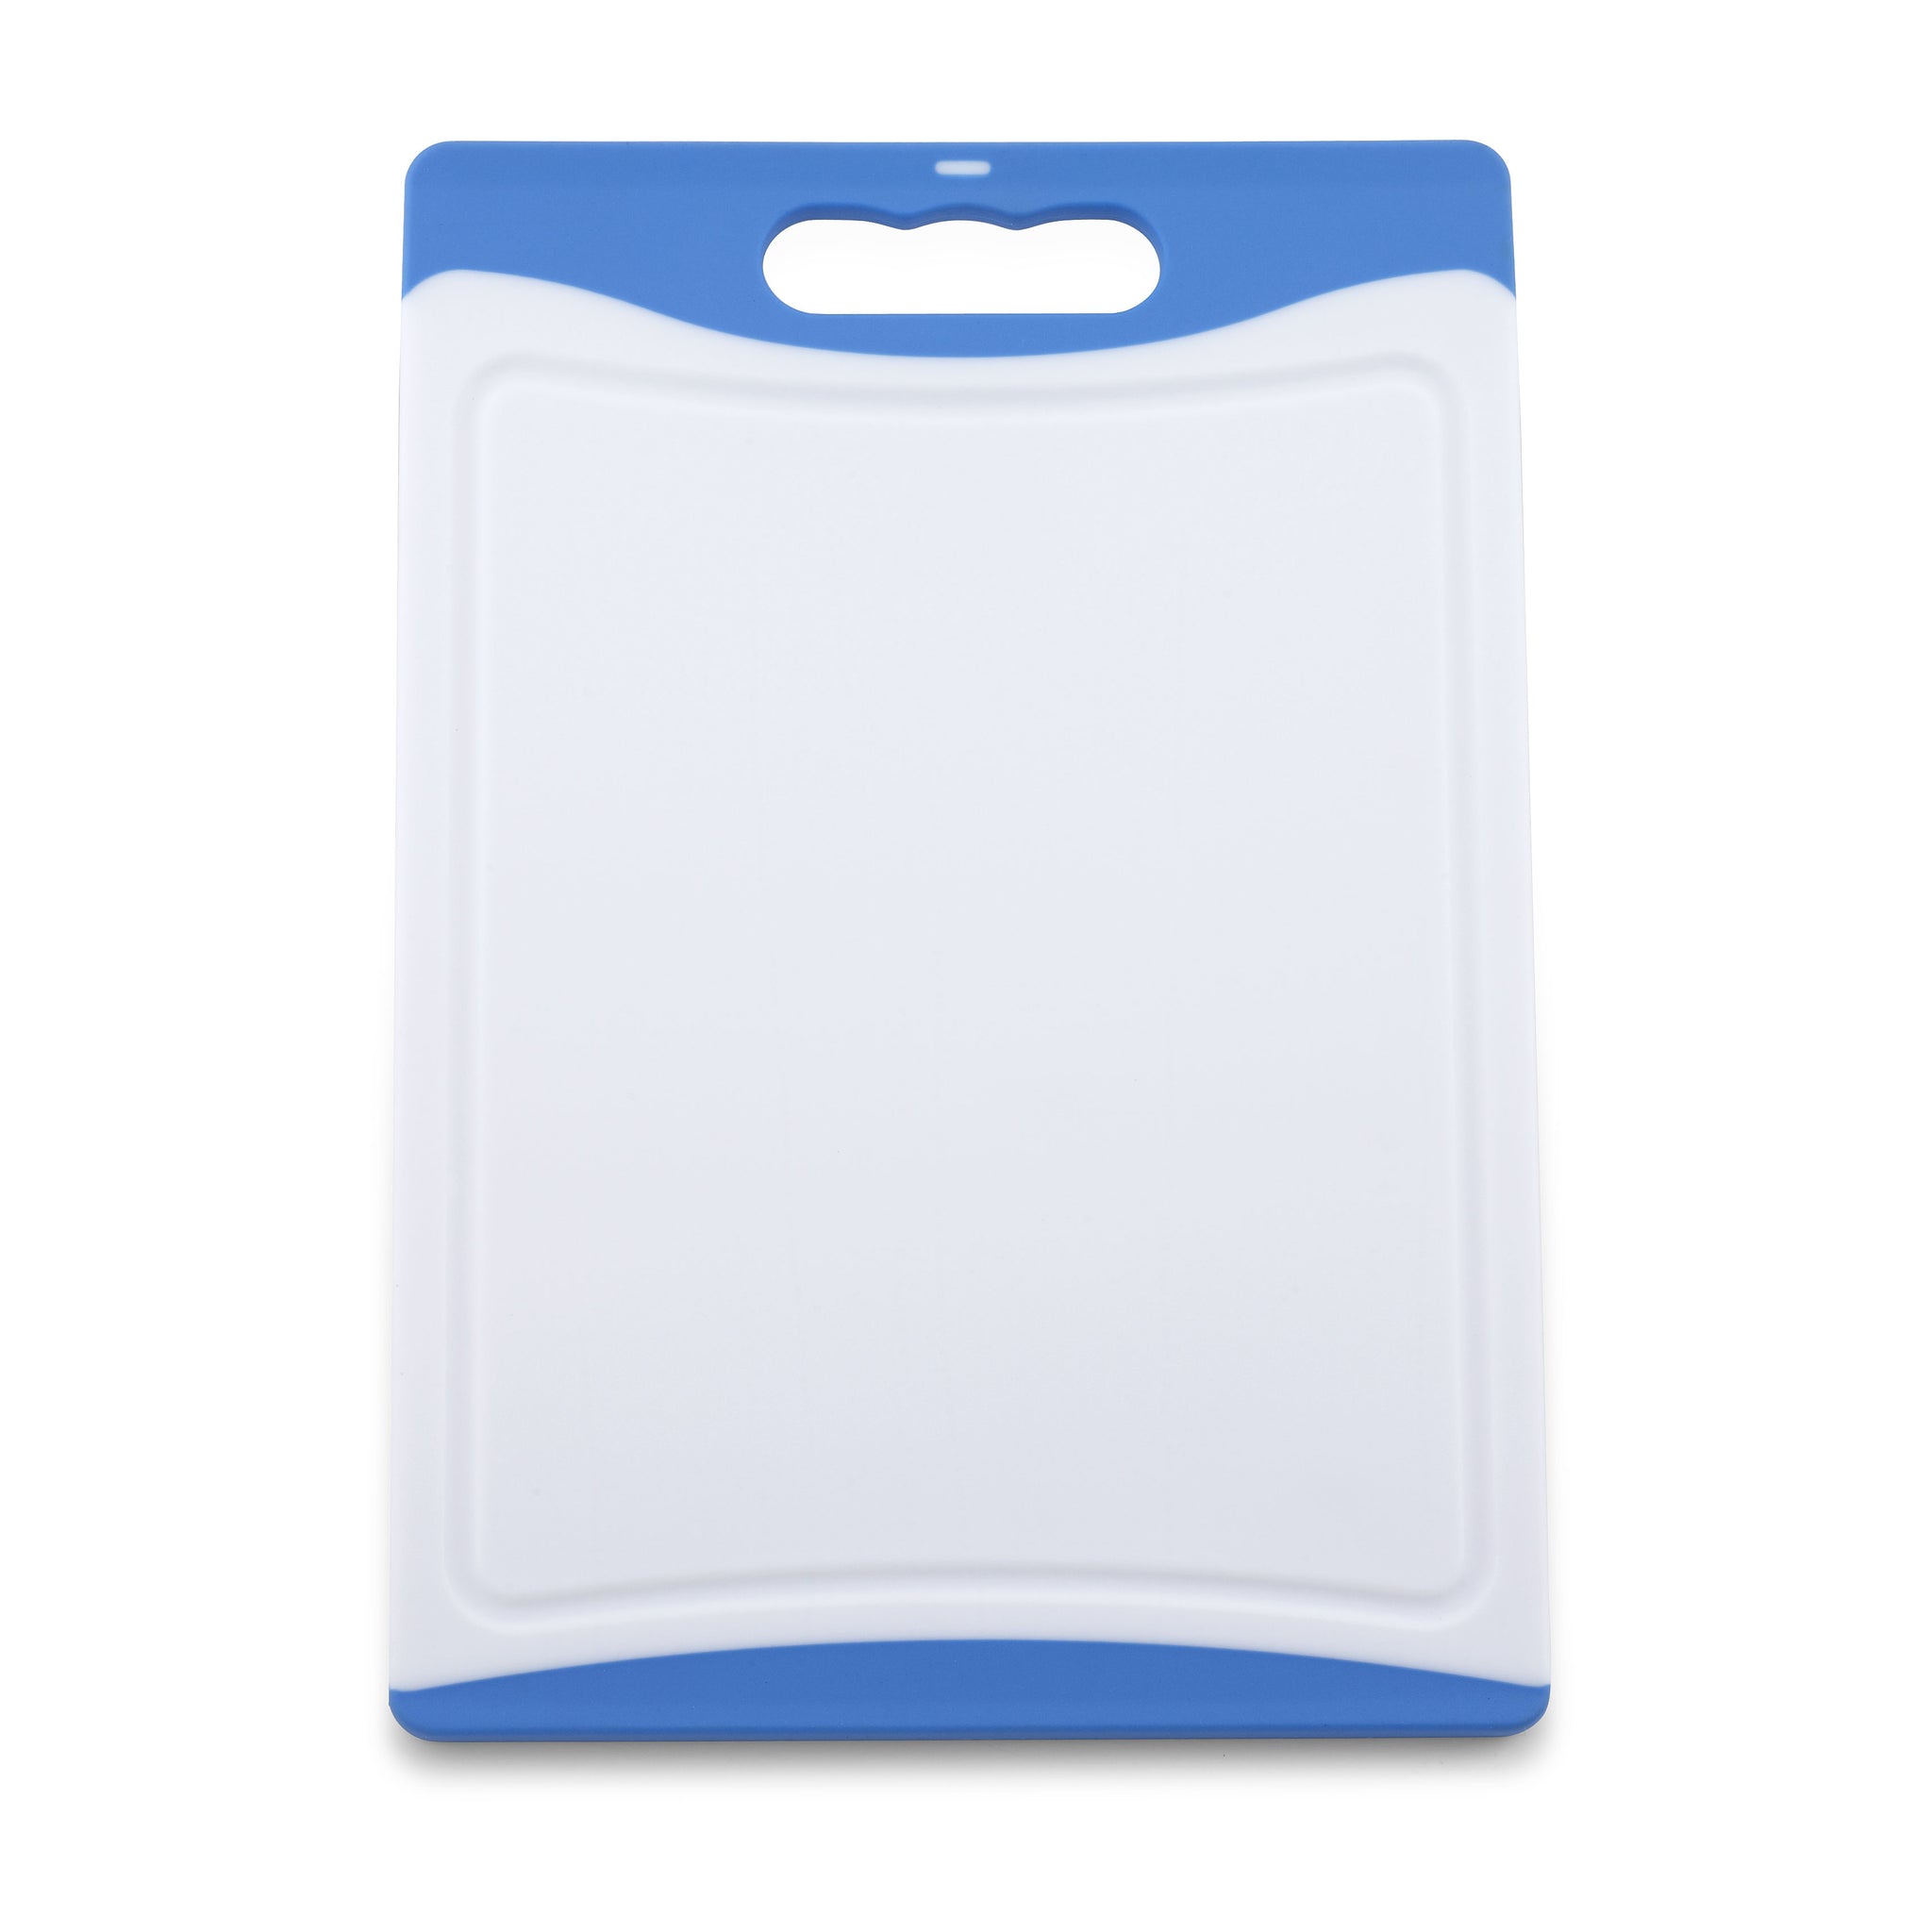 Small Plastic Chopping Board 29 cm, in Blue, Dishwasher Safe - Professional Cookware by Jean Patrique